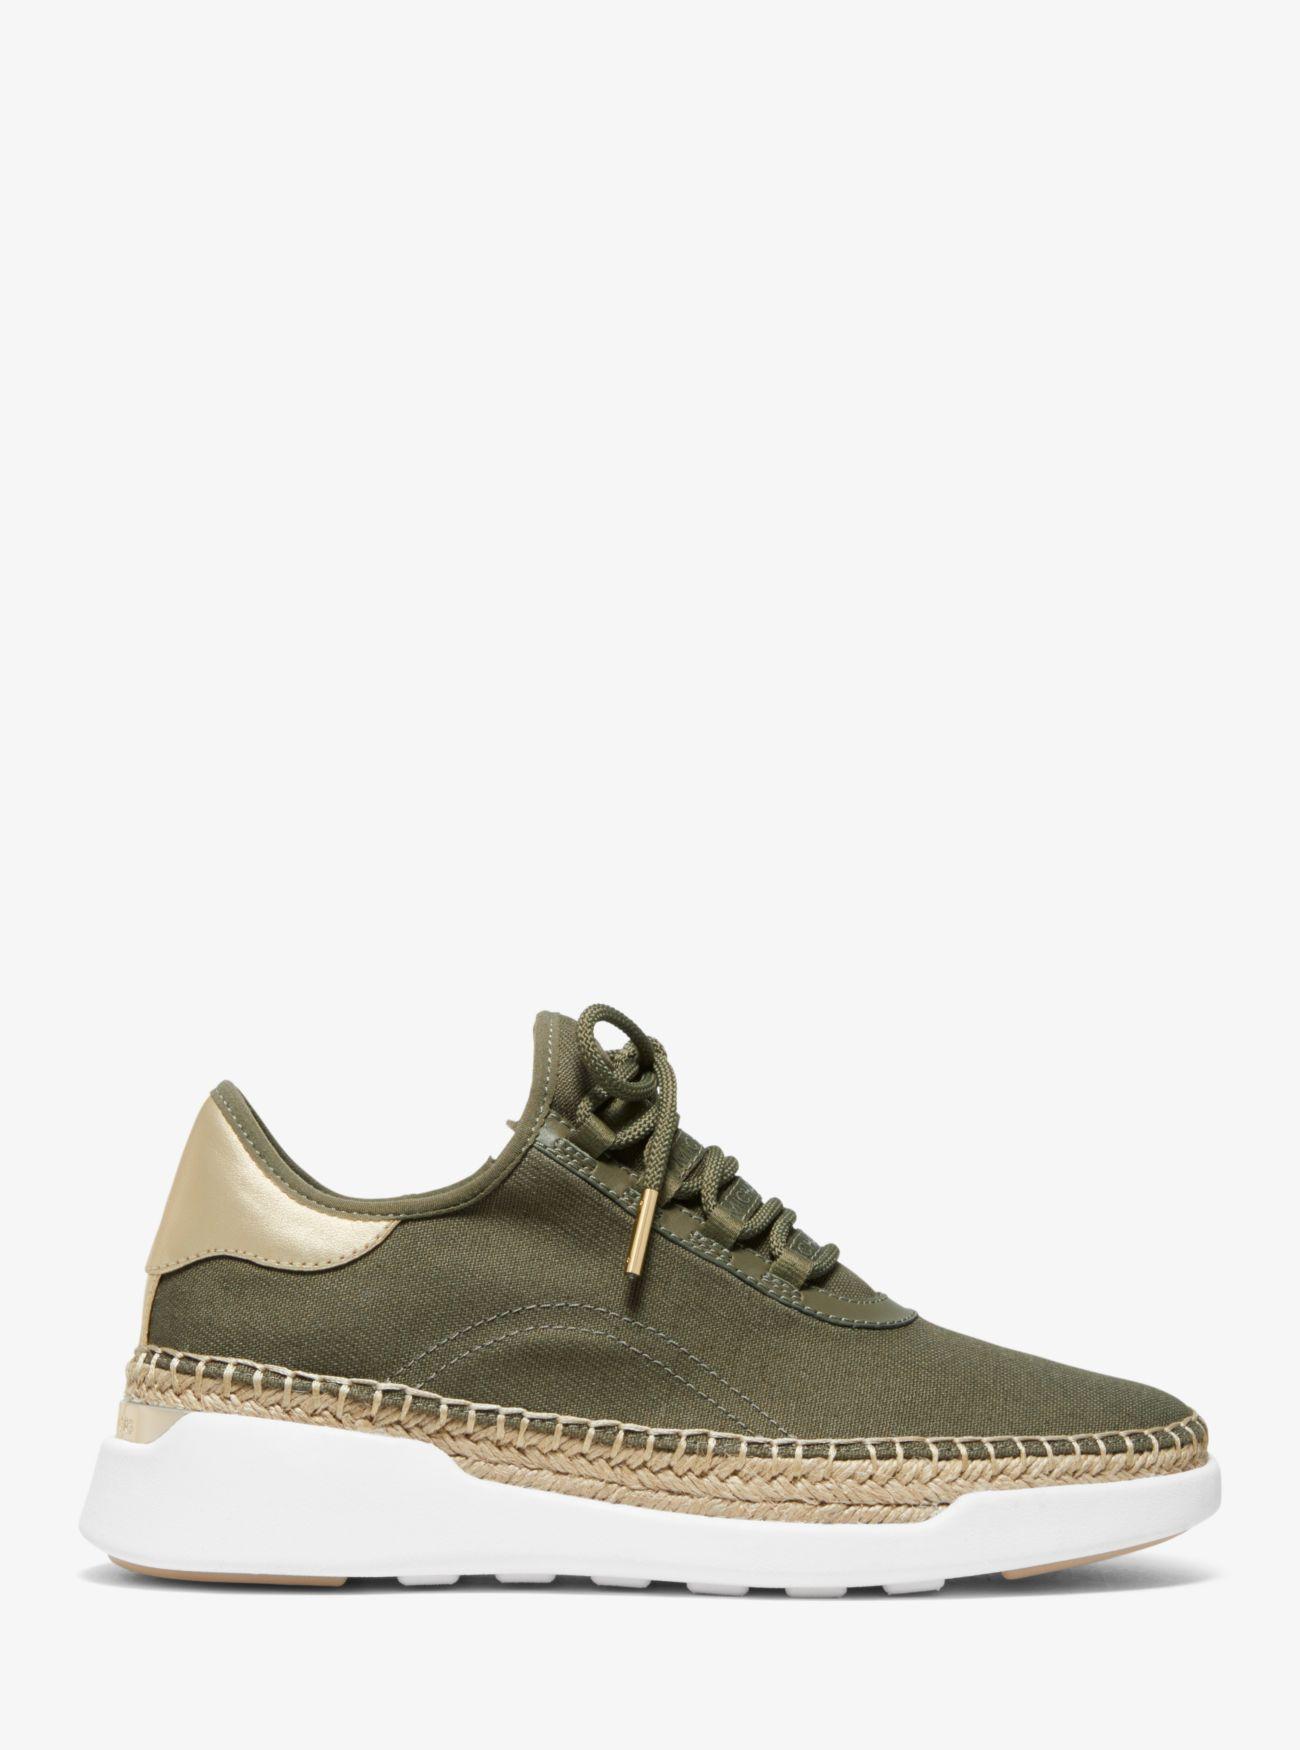 Michael Kors Finch Canvas And Leather Lace-up Sneaker in Olive (Green) -  Lyst